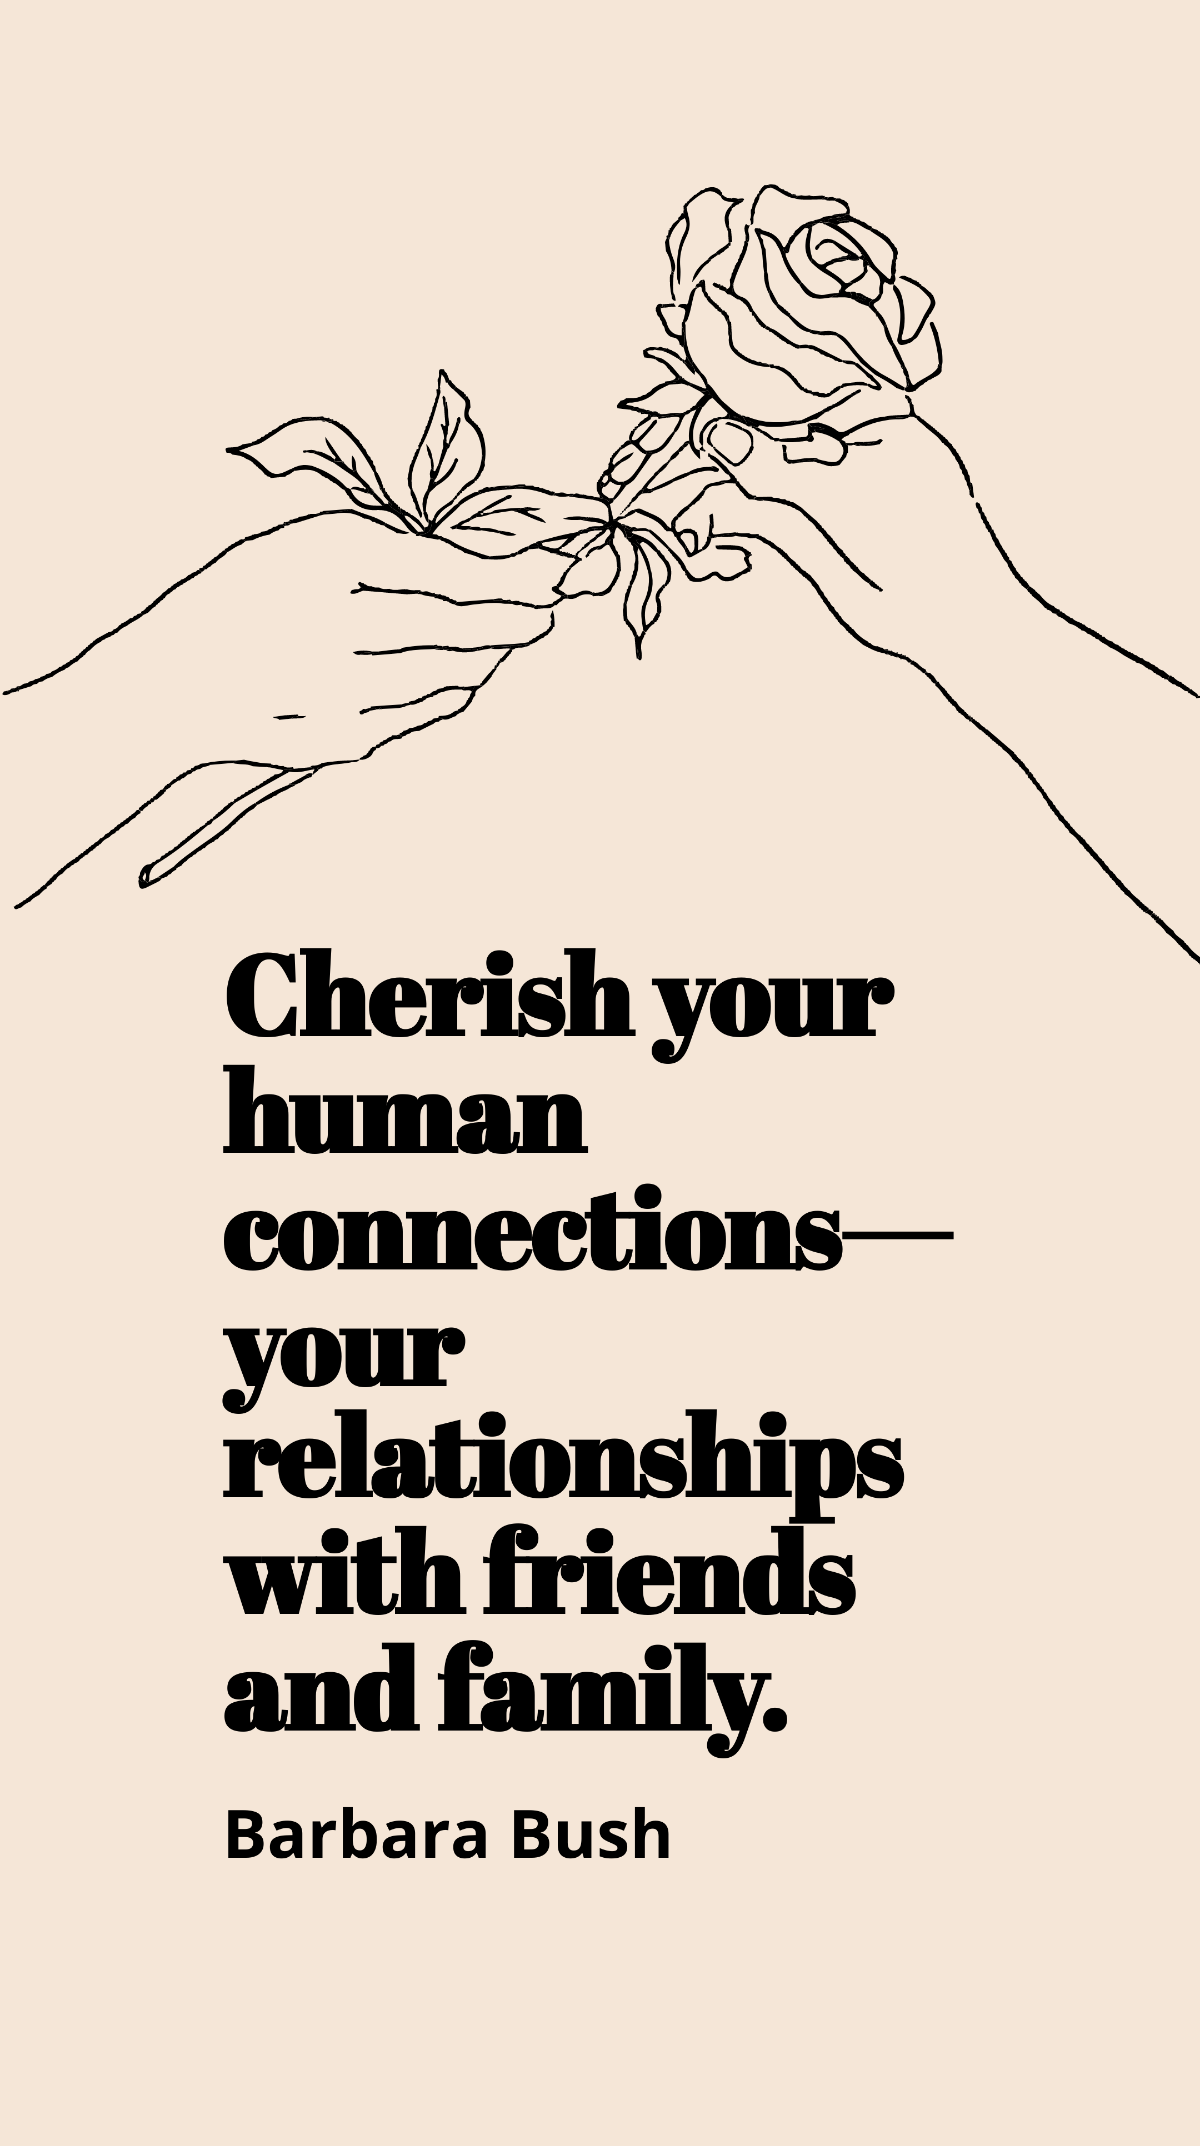 Barbara Bush - Cherish your human connections - your relationships with friends and family. Template